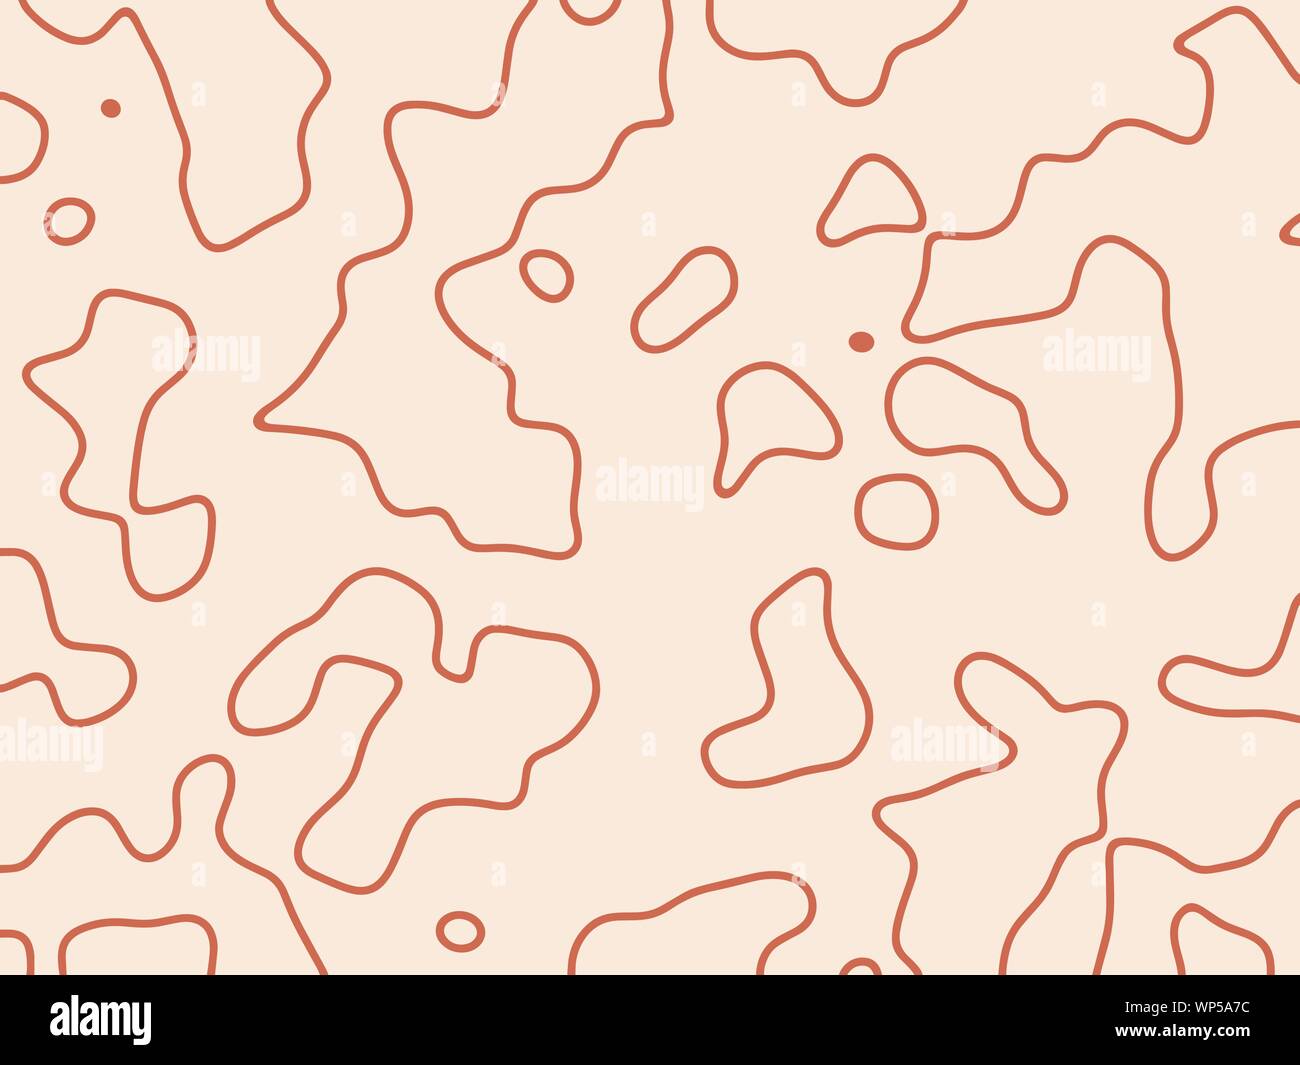 Line drawing of abstract forms and shapes.Red sketch one line hand drawn illustration isolated on biege background. Minimalism contour art . Stock Vector